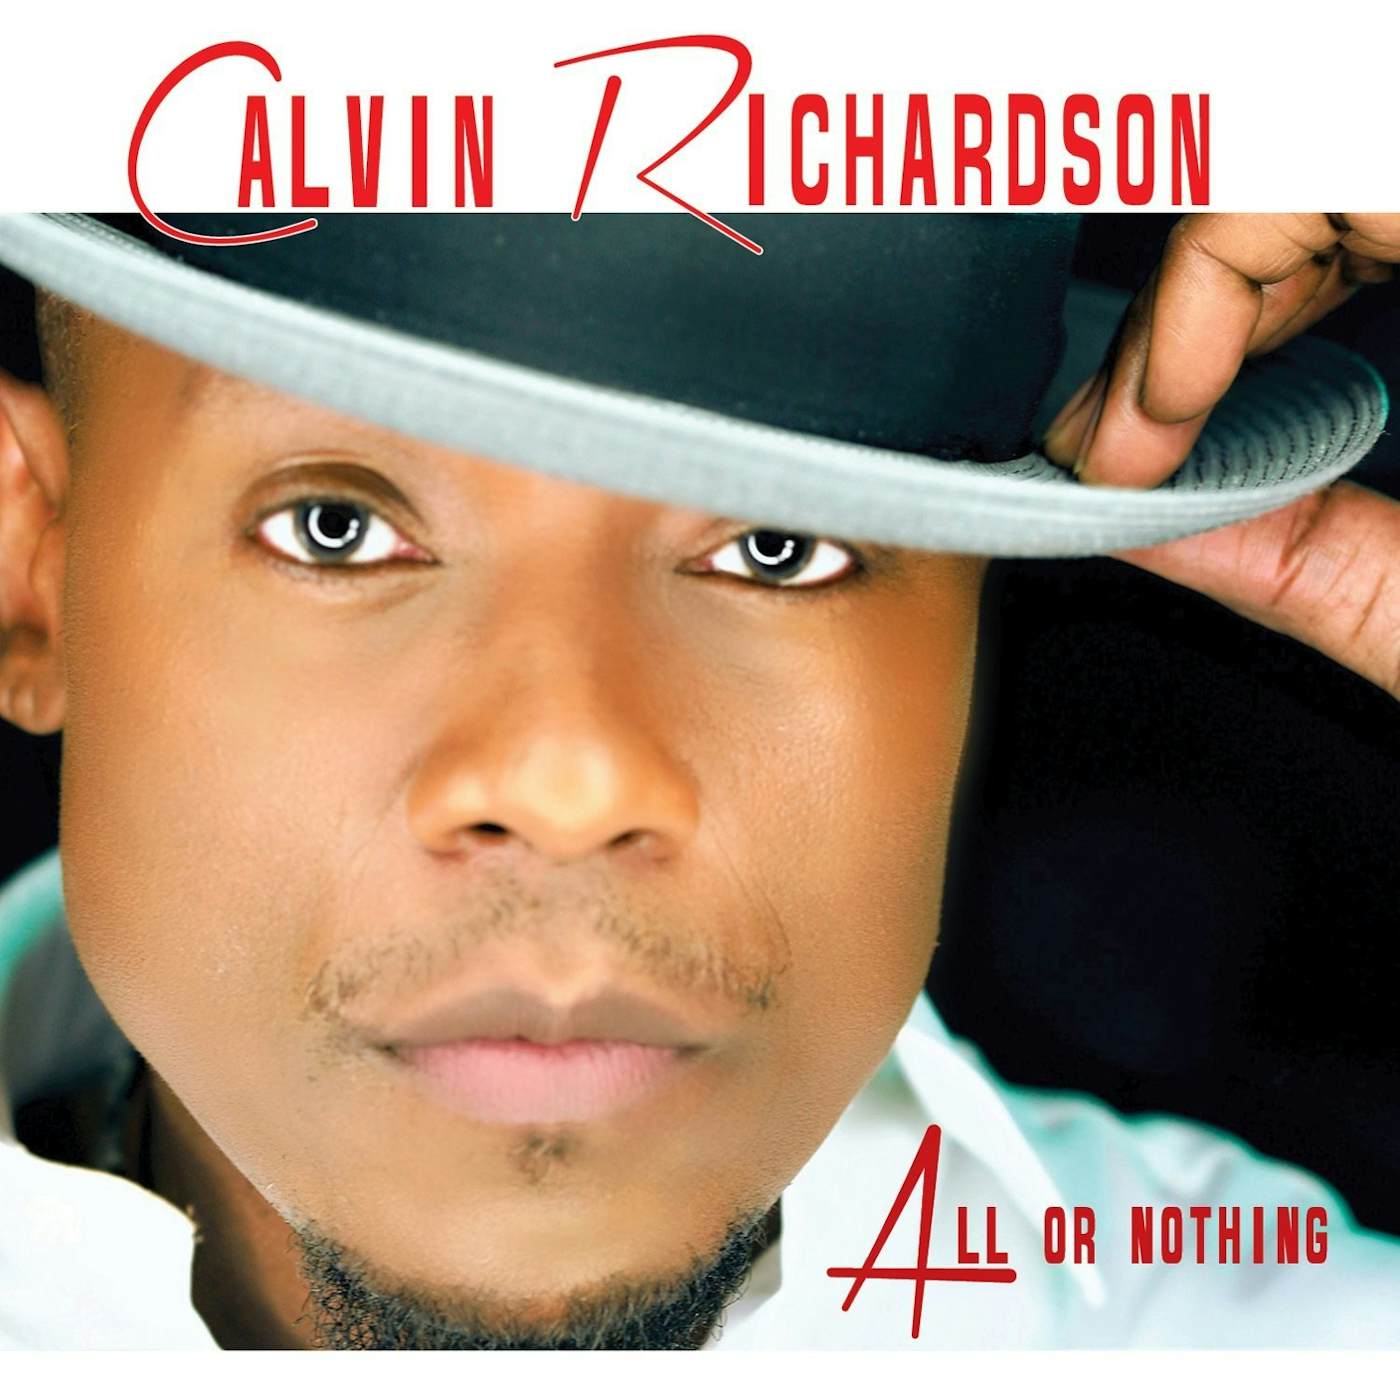 Calvin Richardson ALL OR NOTHING CD